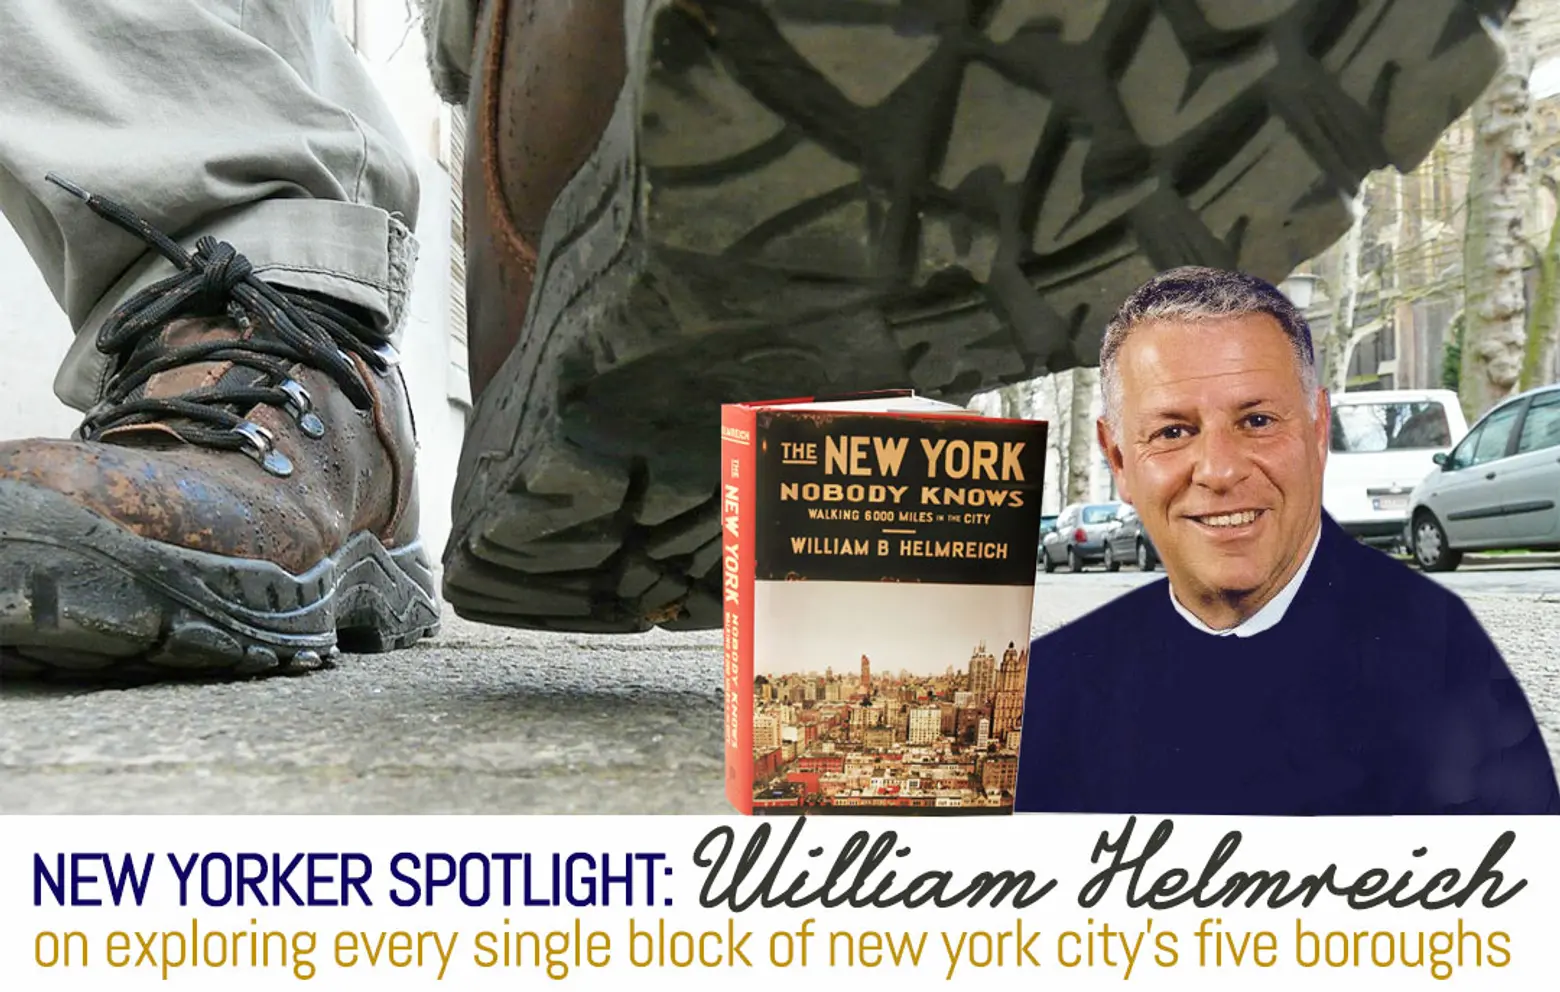 New Yorker Spotlight: William Helmreich Went on the Ultimate 6,000-Mile Walking Tour of NYC